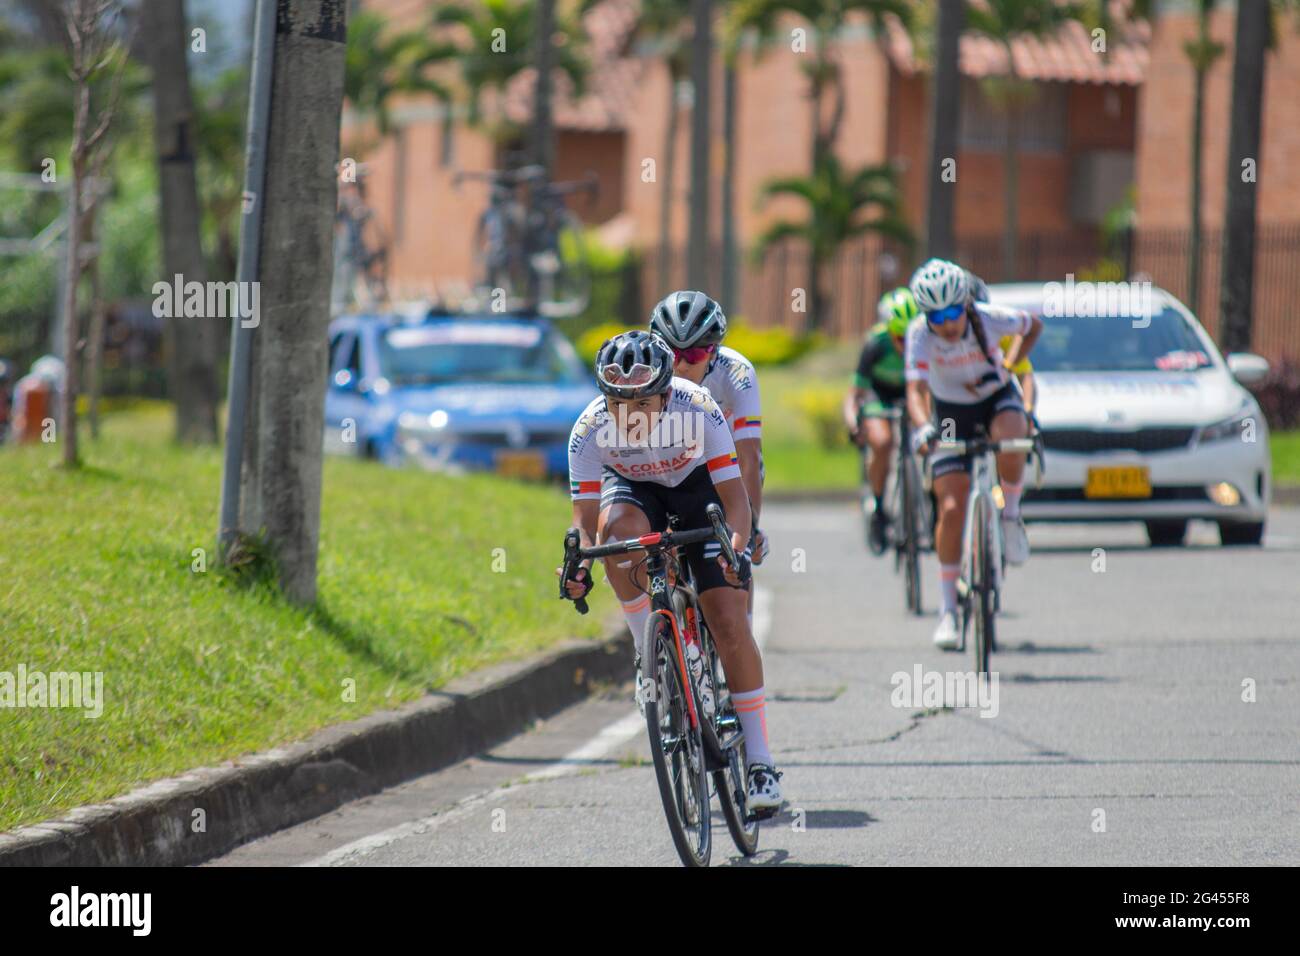 Pereira, Colombia. 18th June, 2021. Cyclists from the Colnago team participate in the Women's Colombian National Road Race Championship in the streets de Pereira, Colombia on June 18, 2021 Credit: Long Visual Press/Alamy Live News Stock Photo